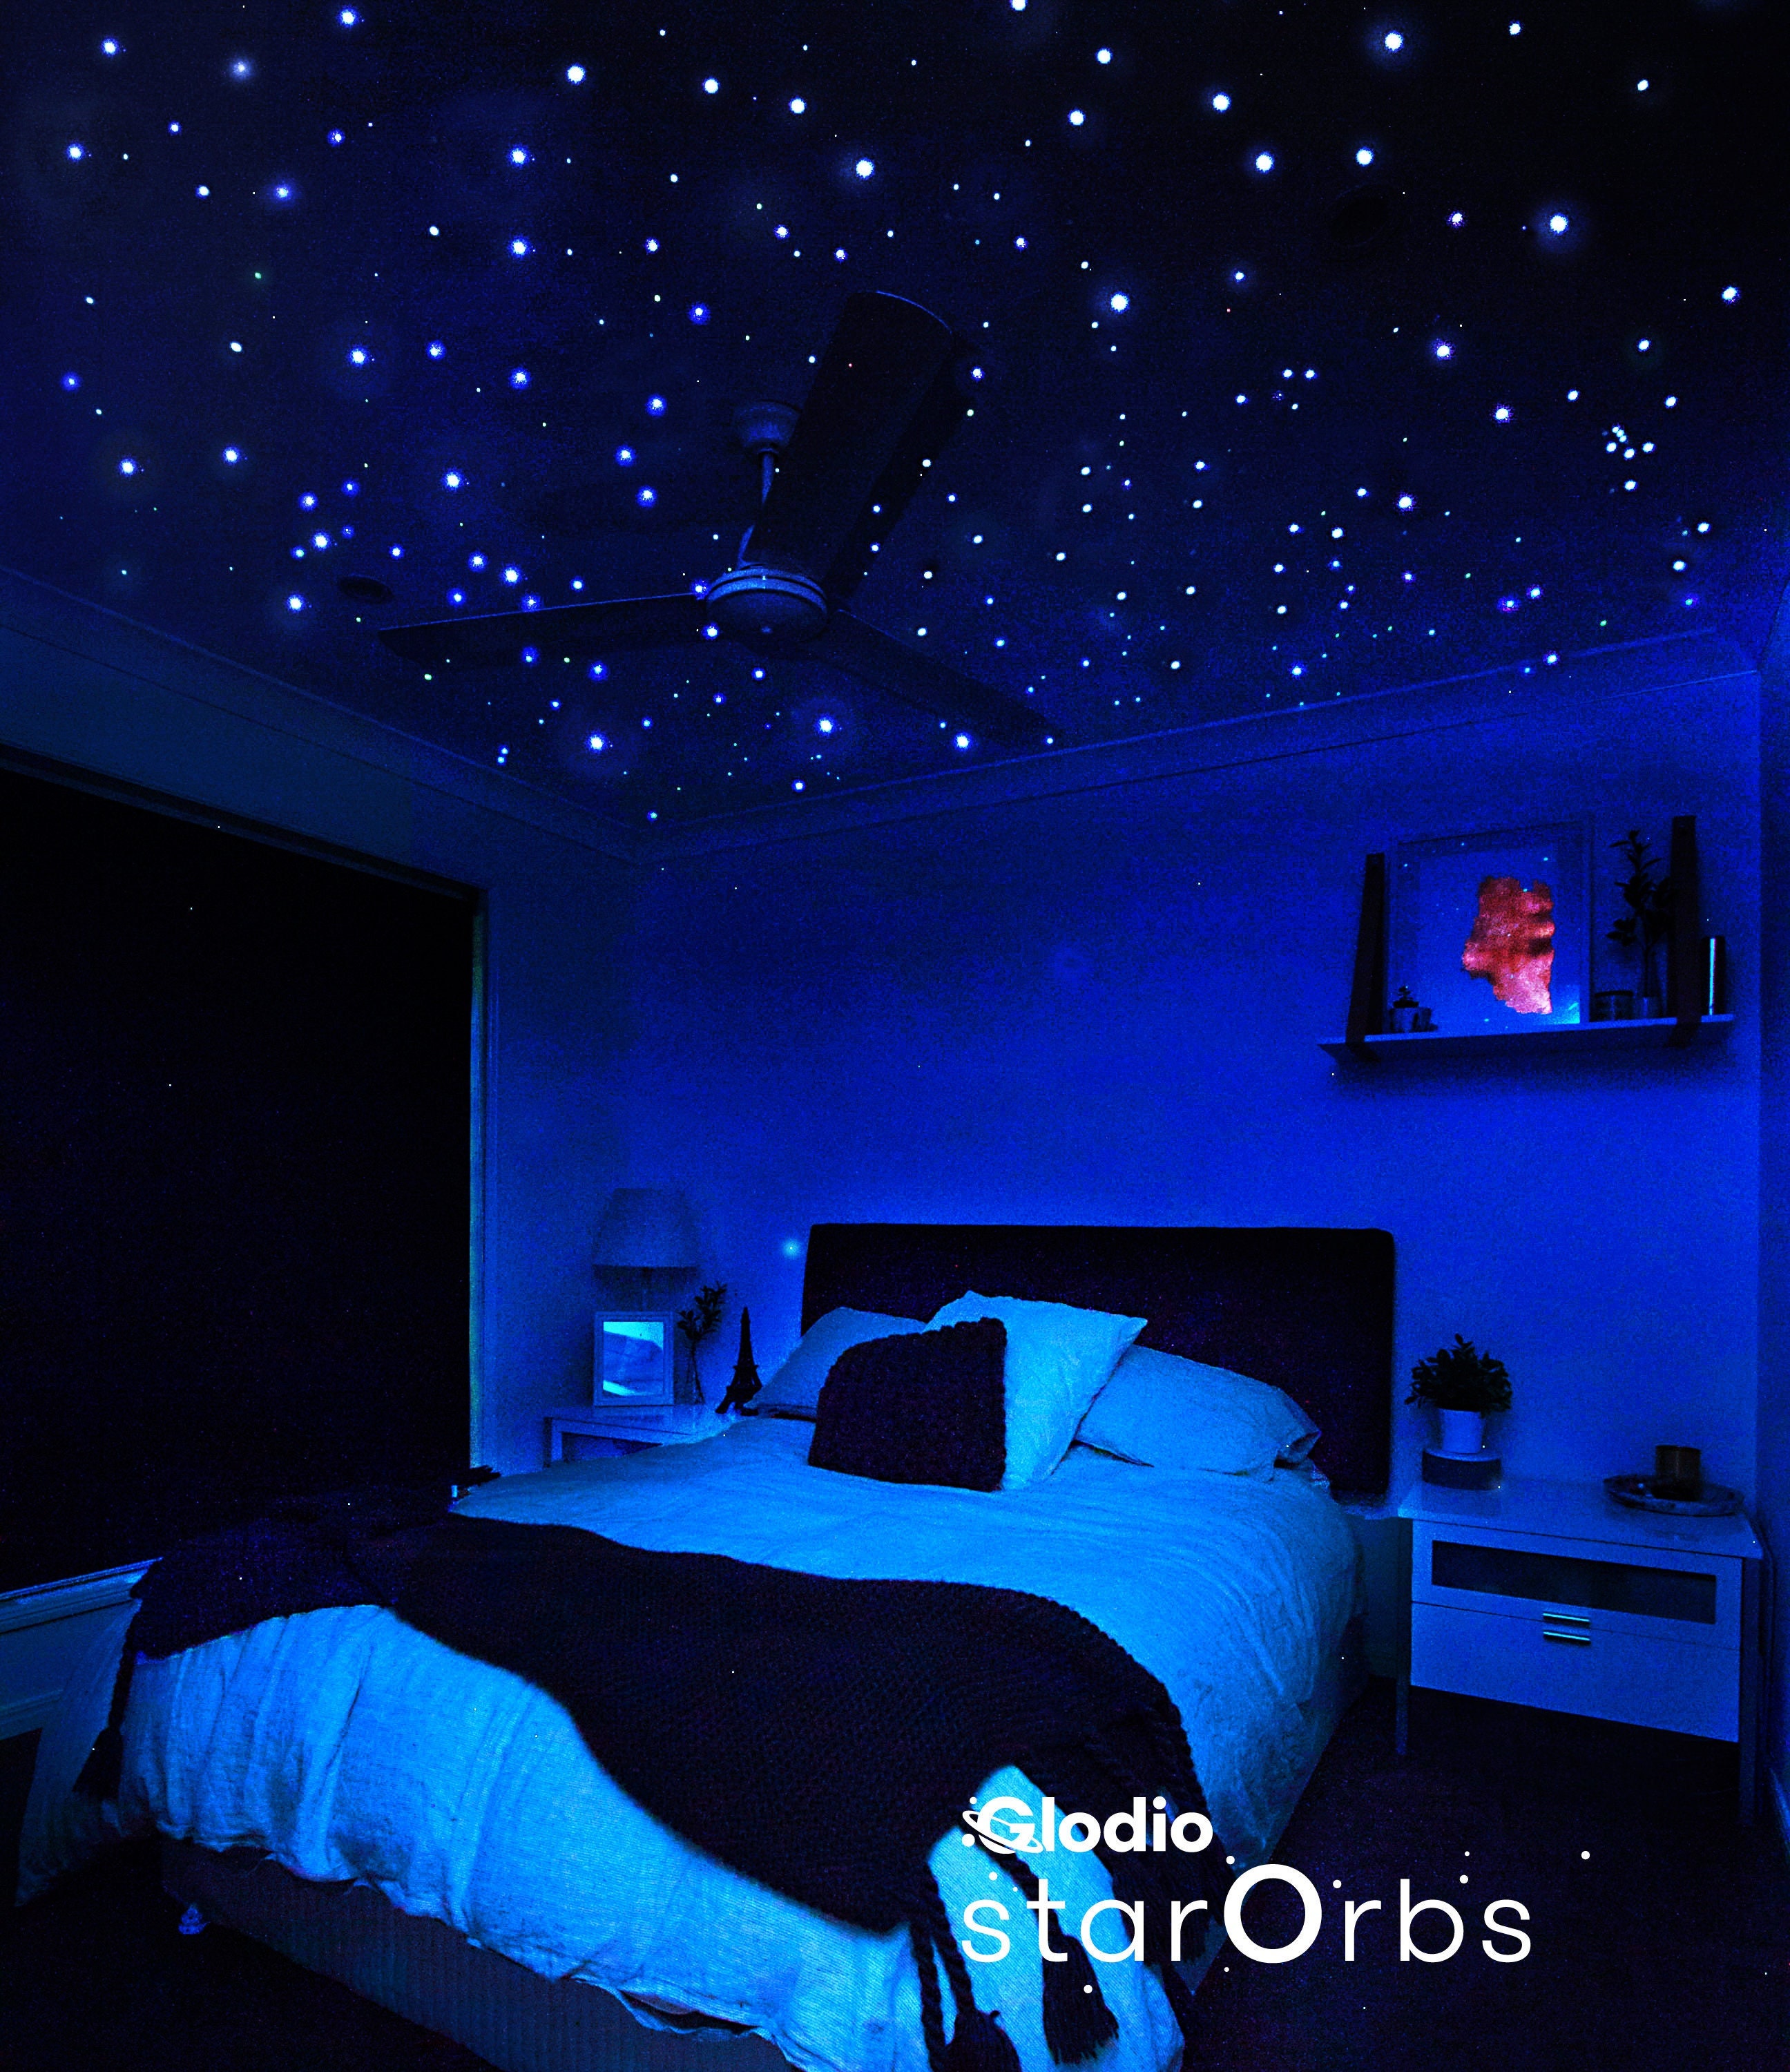 Glow in the Dark Self-adhesive Stickers Luminous Fluorescent Wall and  Ceiling Decals Stars and Moon Night Sky for Children's Room 